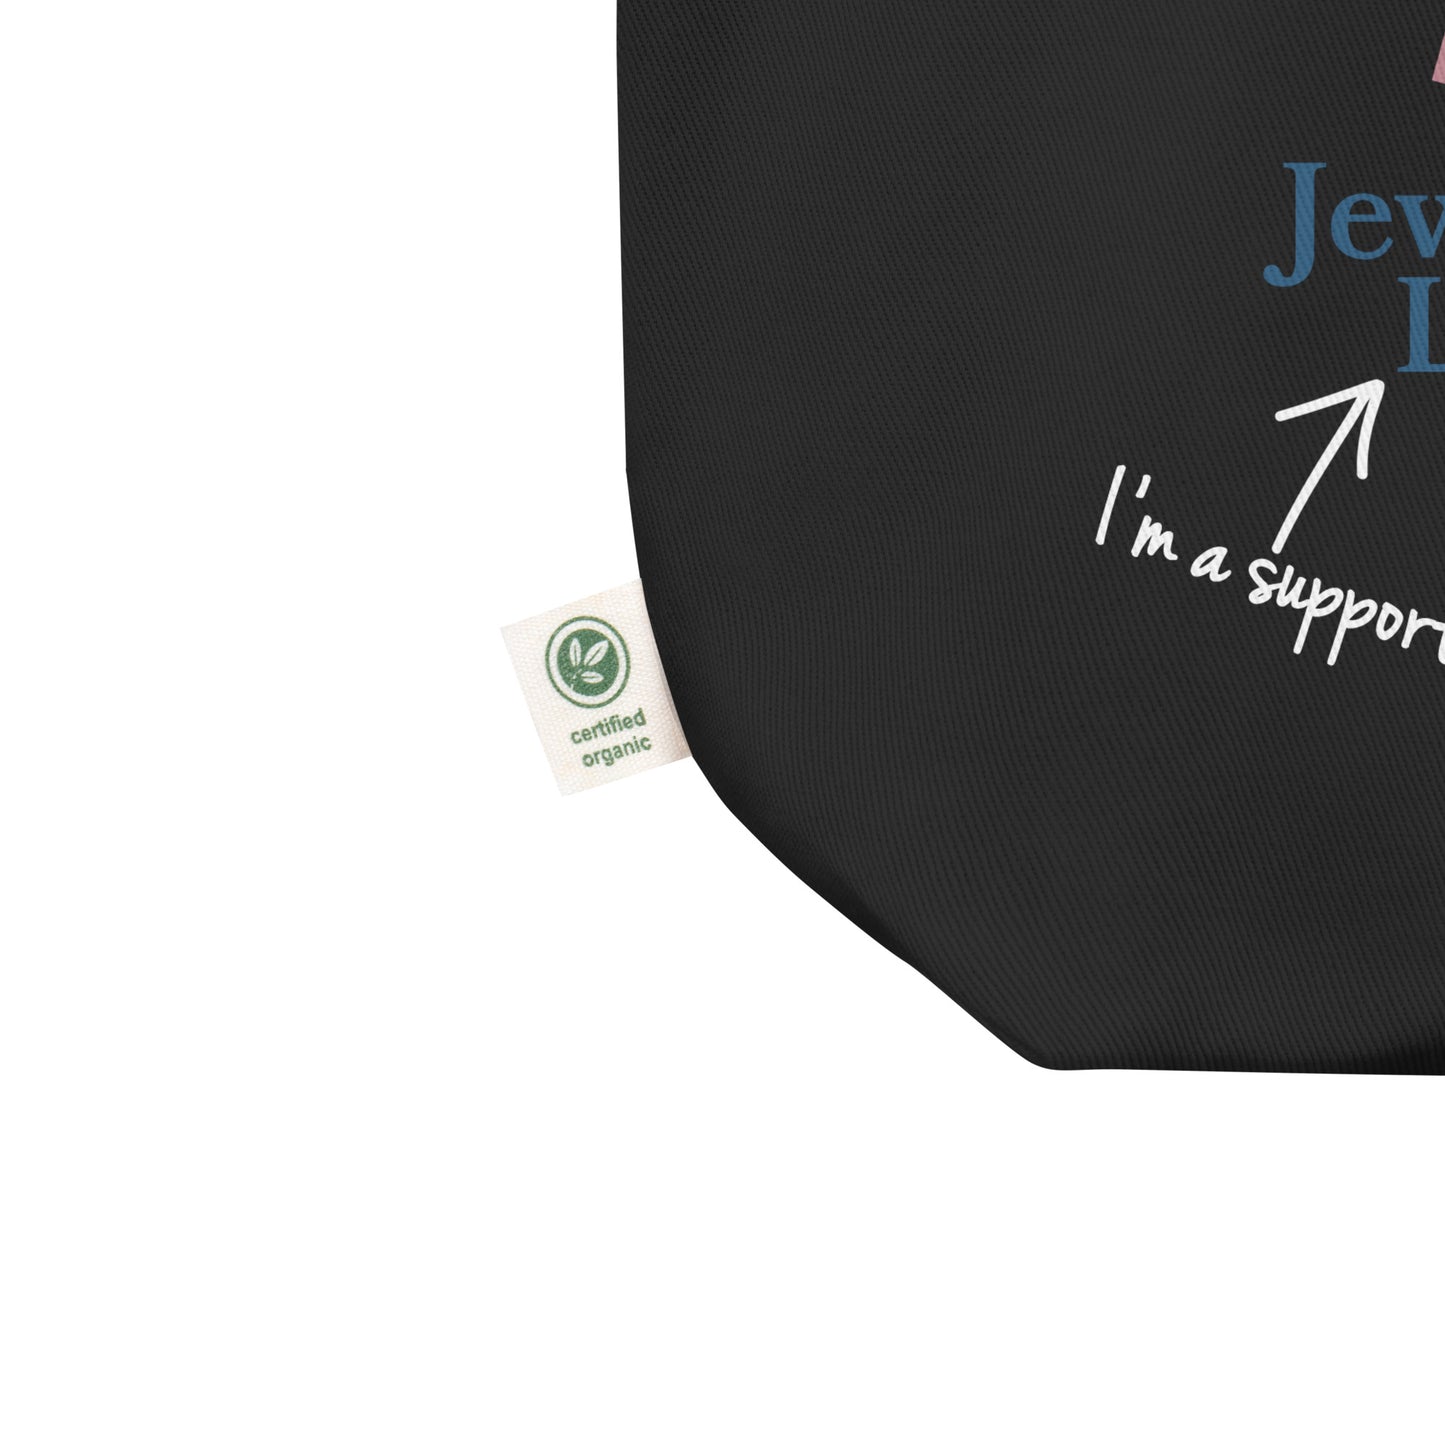 "I'm a supporter" JCLF Tote Bag